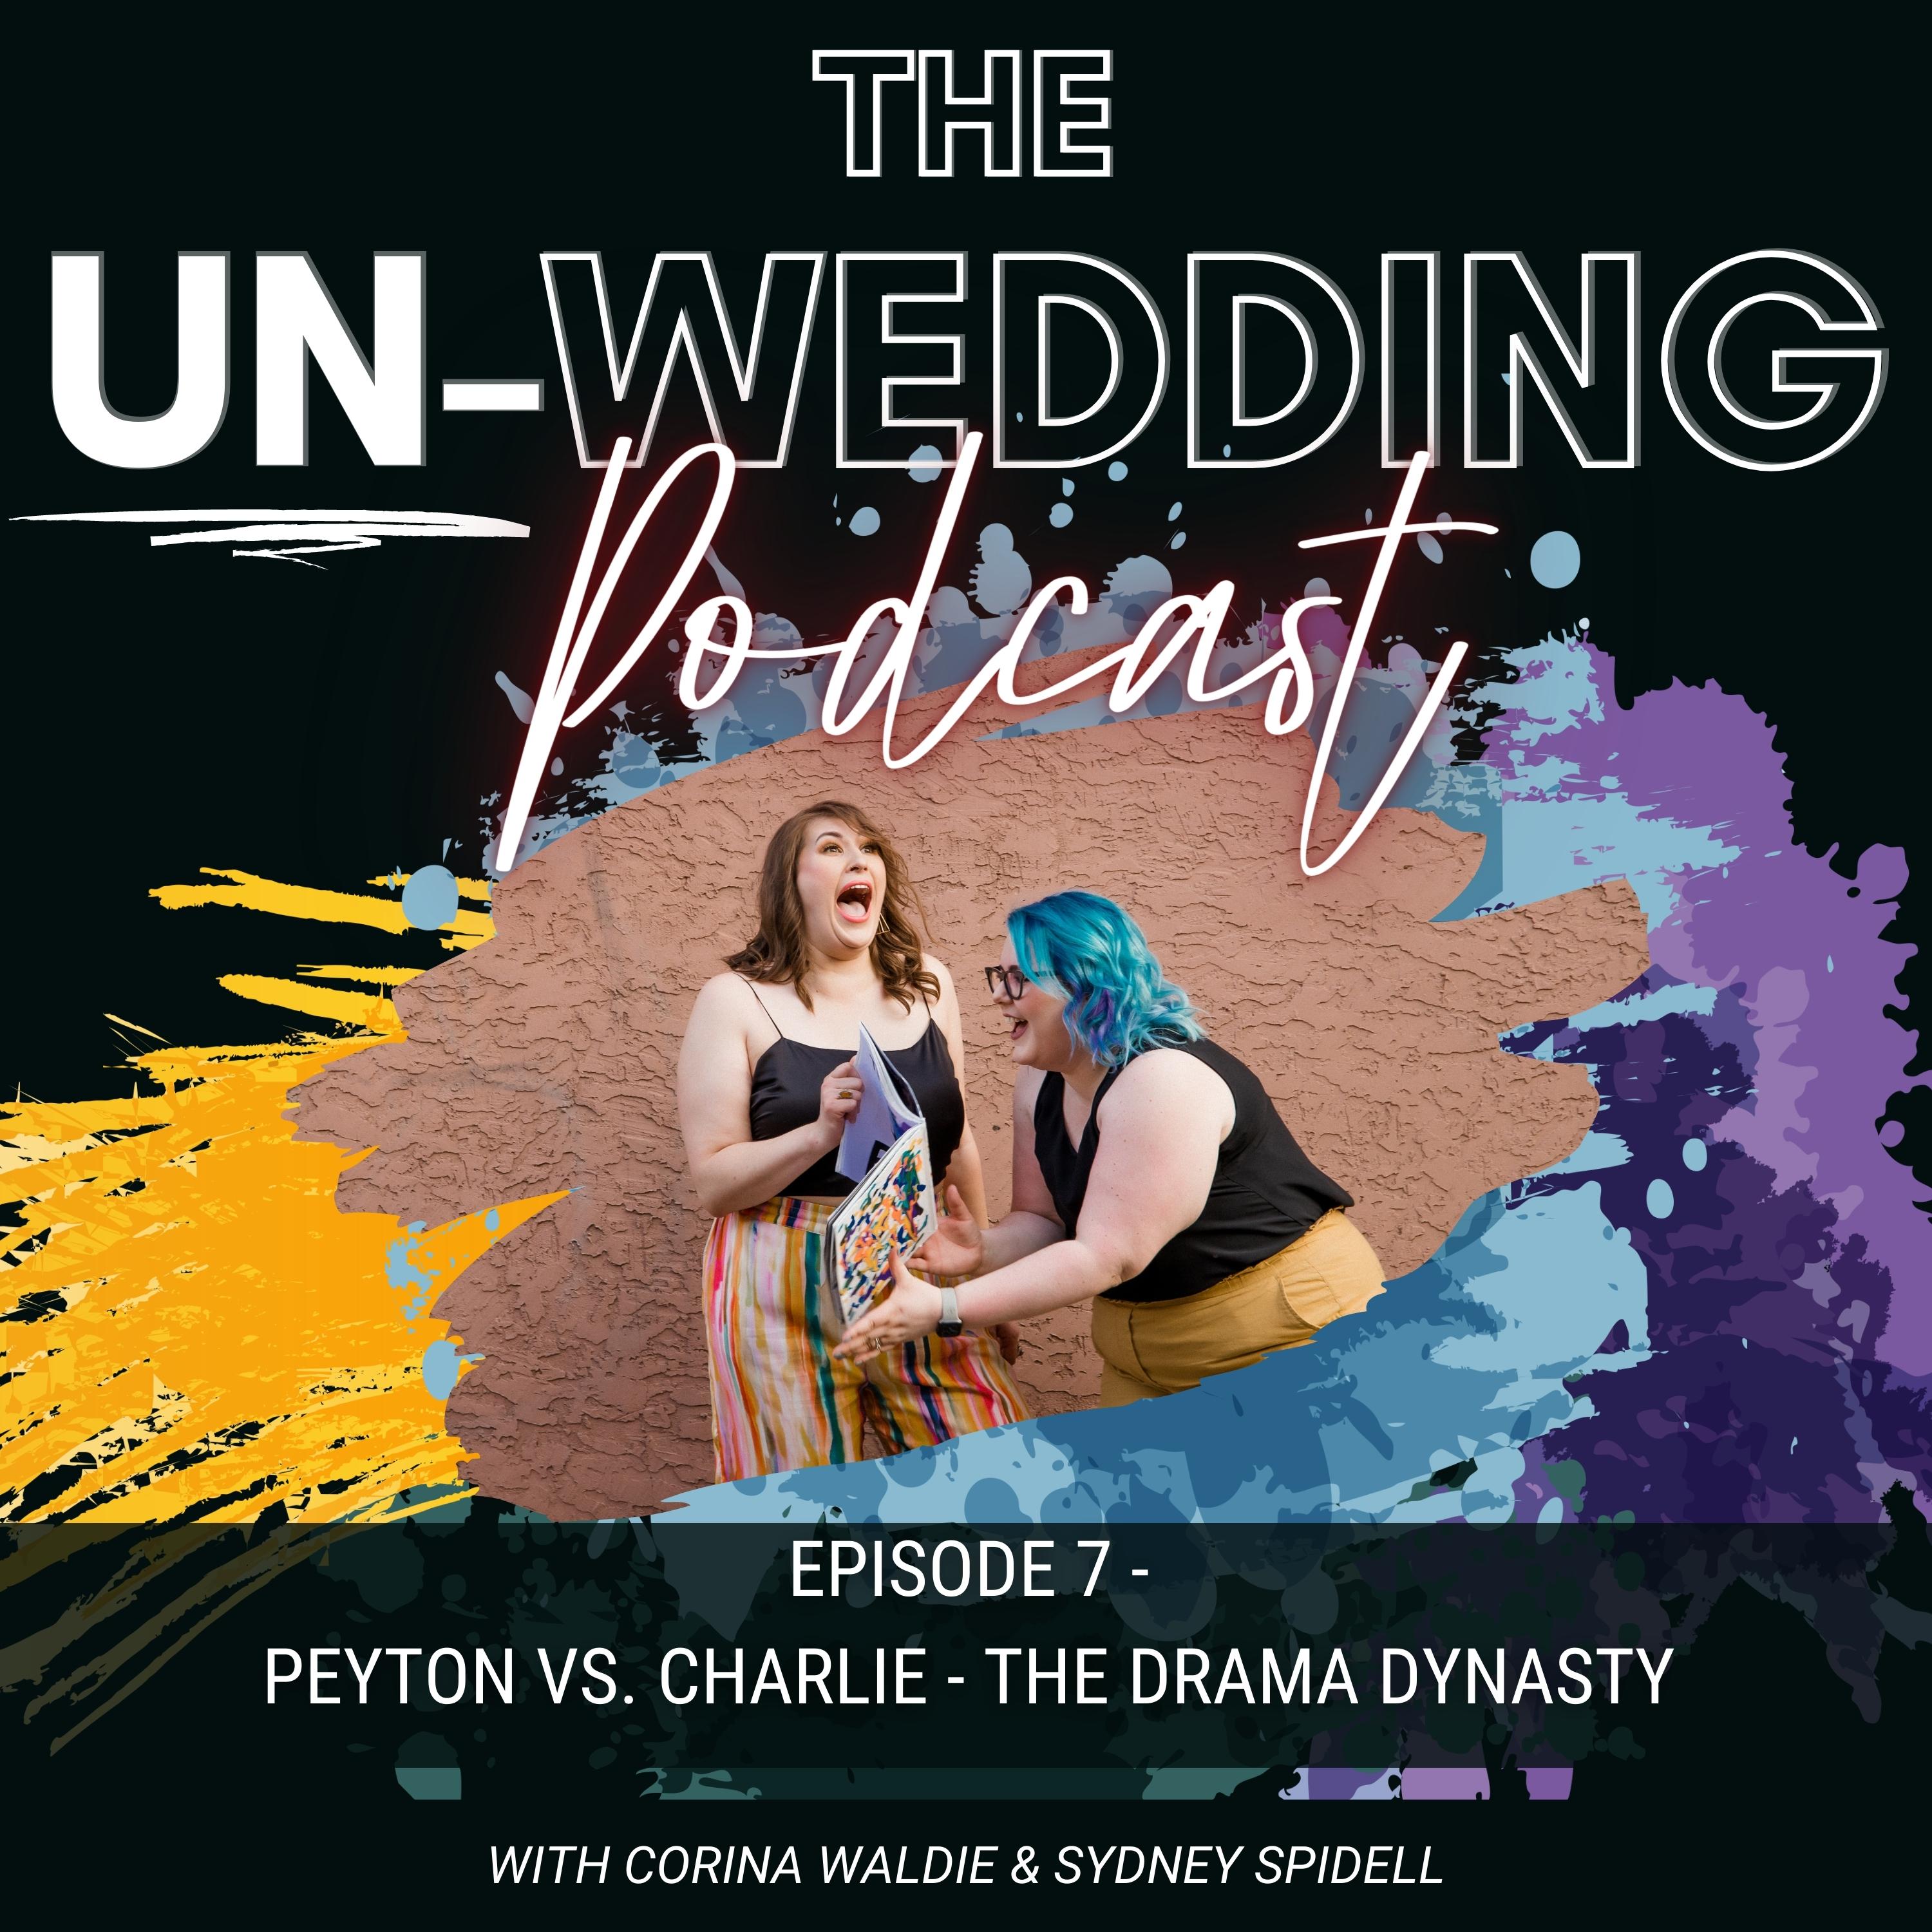 Artwork for podcast The Un-Wedding Podcast